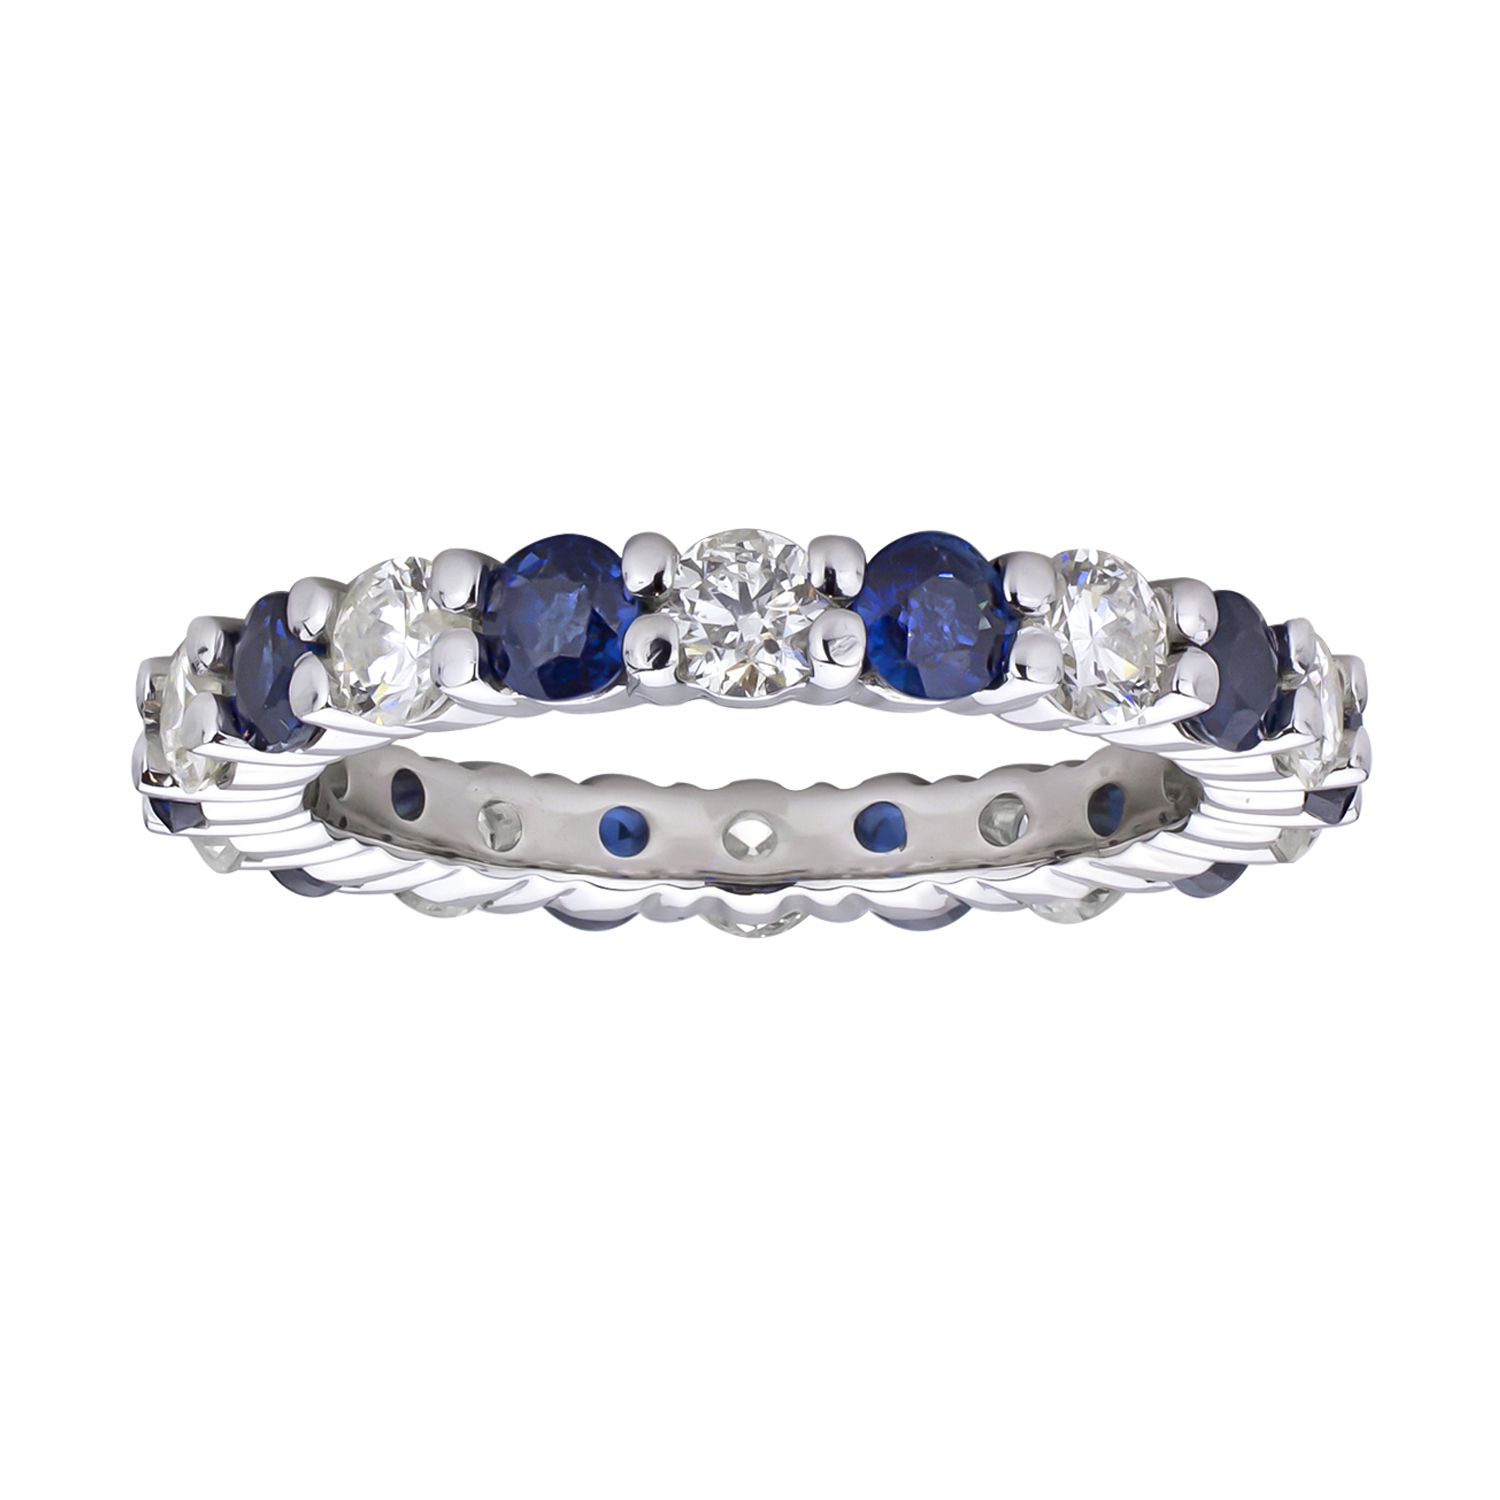 2.20cttw Diamond and Sapphire Eternity Band set in 14k Gold